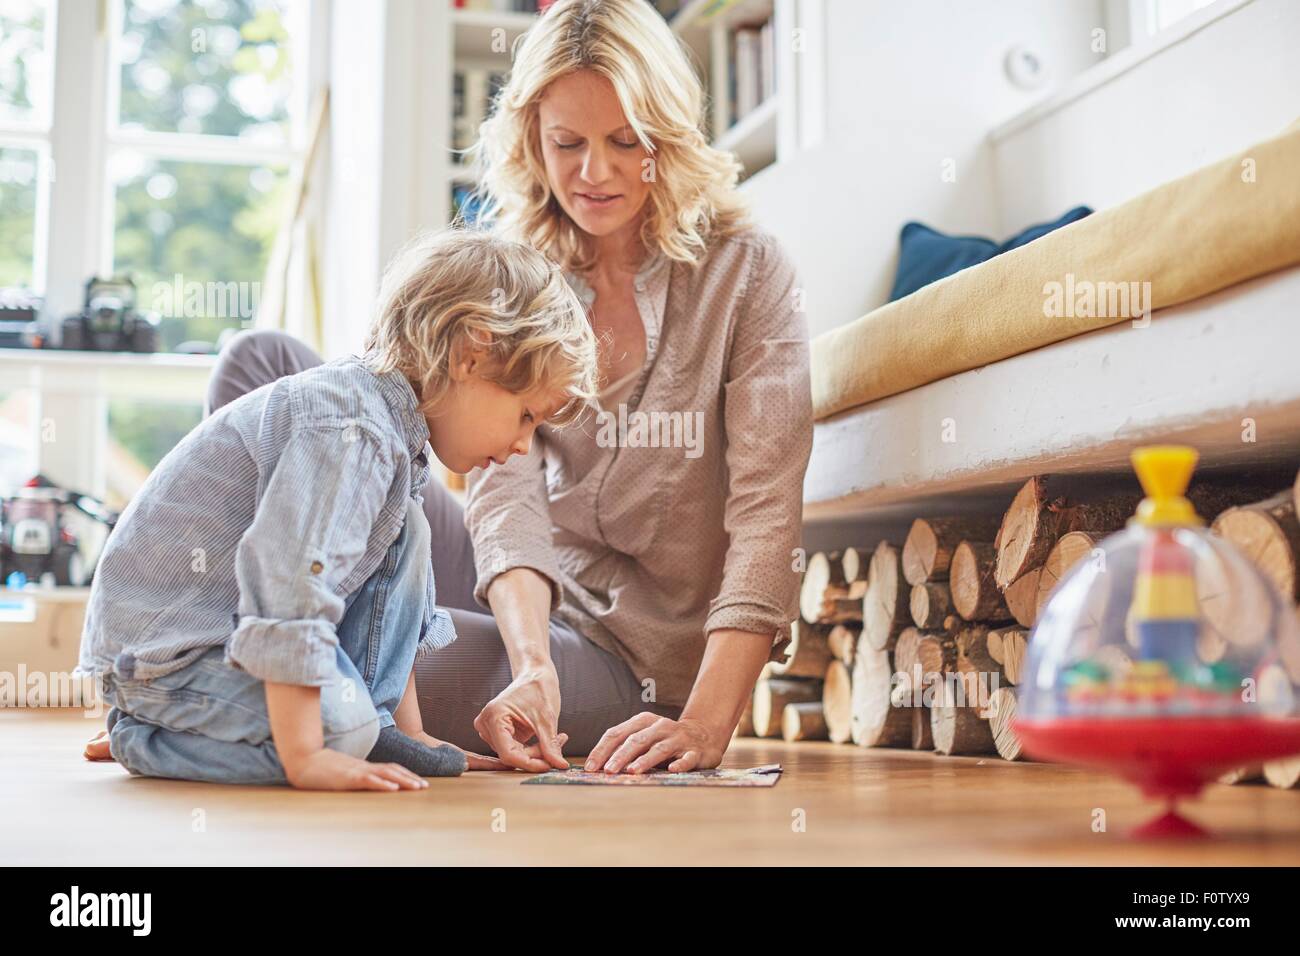 Mother and son sitting on floor, doing puzzle together Stock Photo